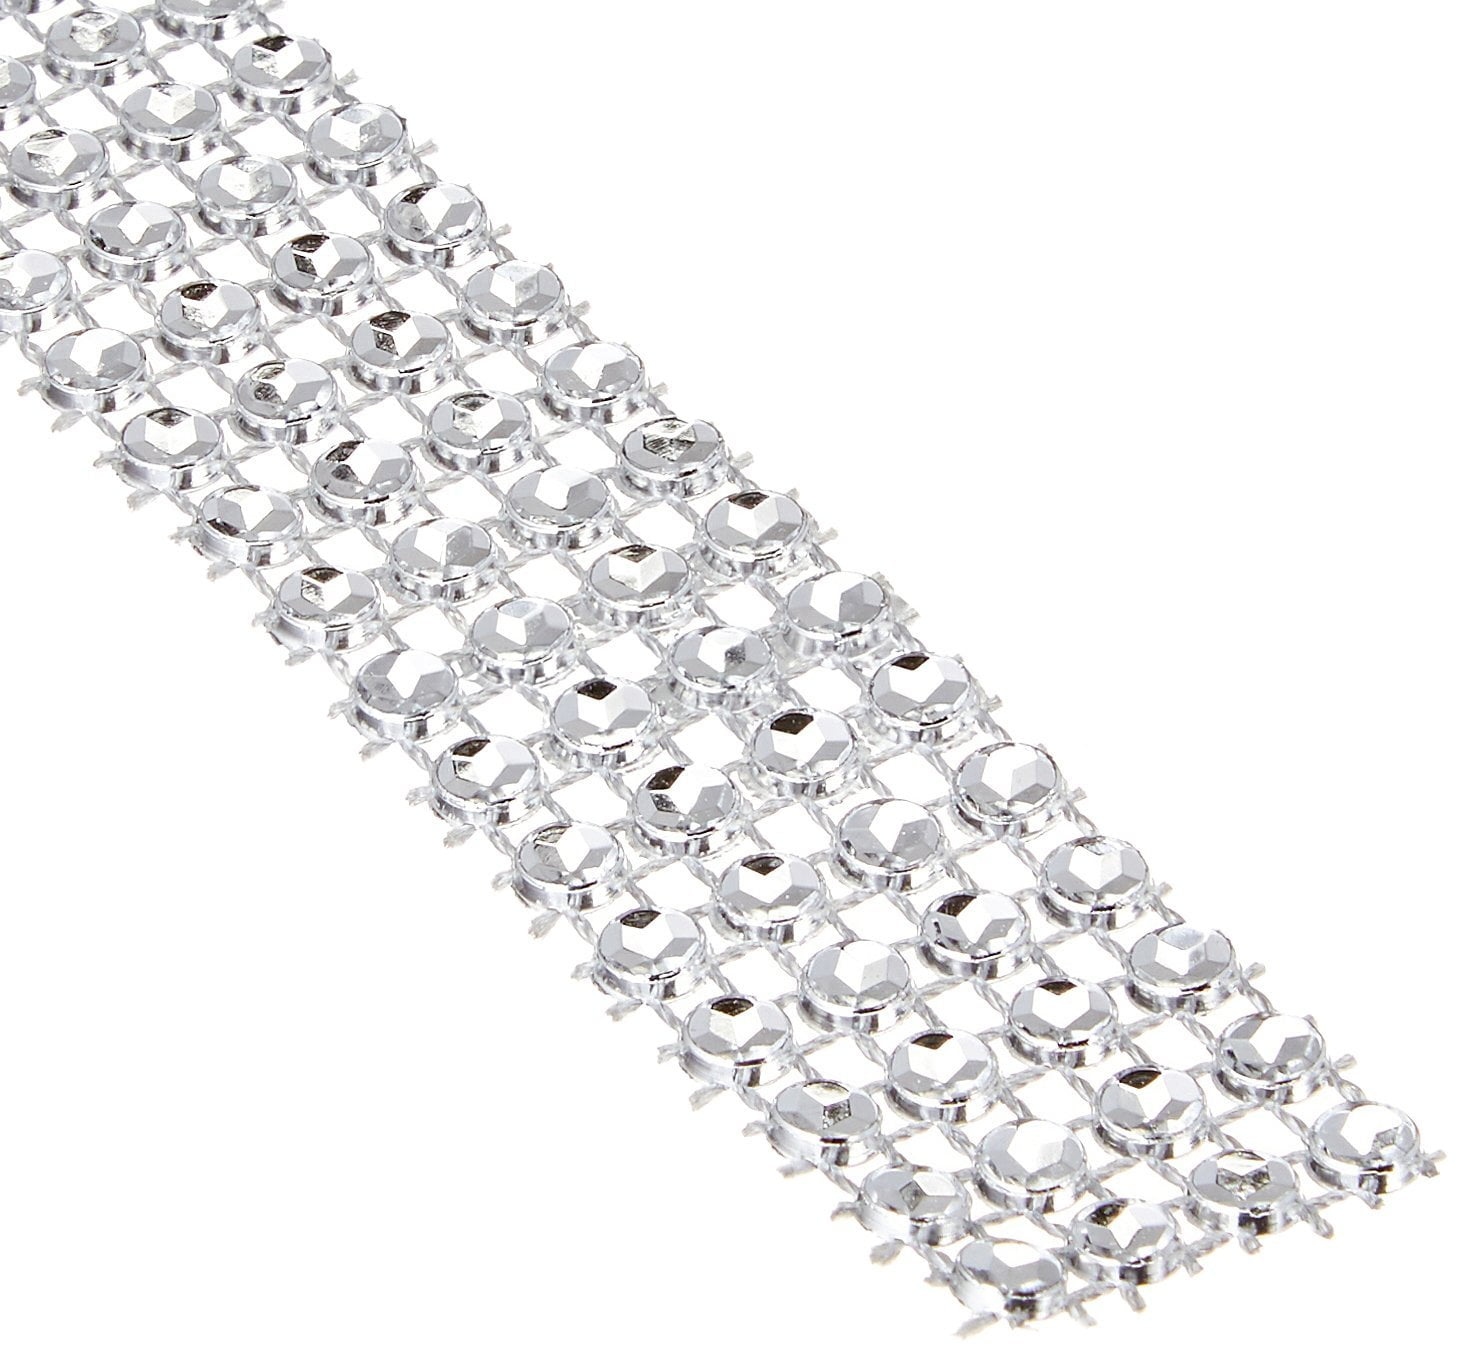 Diamond shape Roll for decoration Details about   Rhinestone mesh Ribbon 3YARDS 24 rows Aprox.3" 